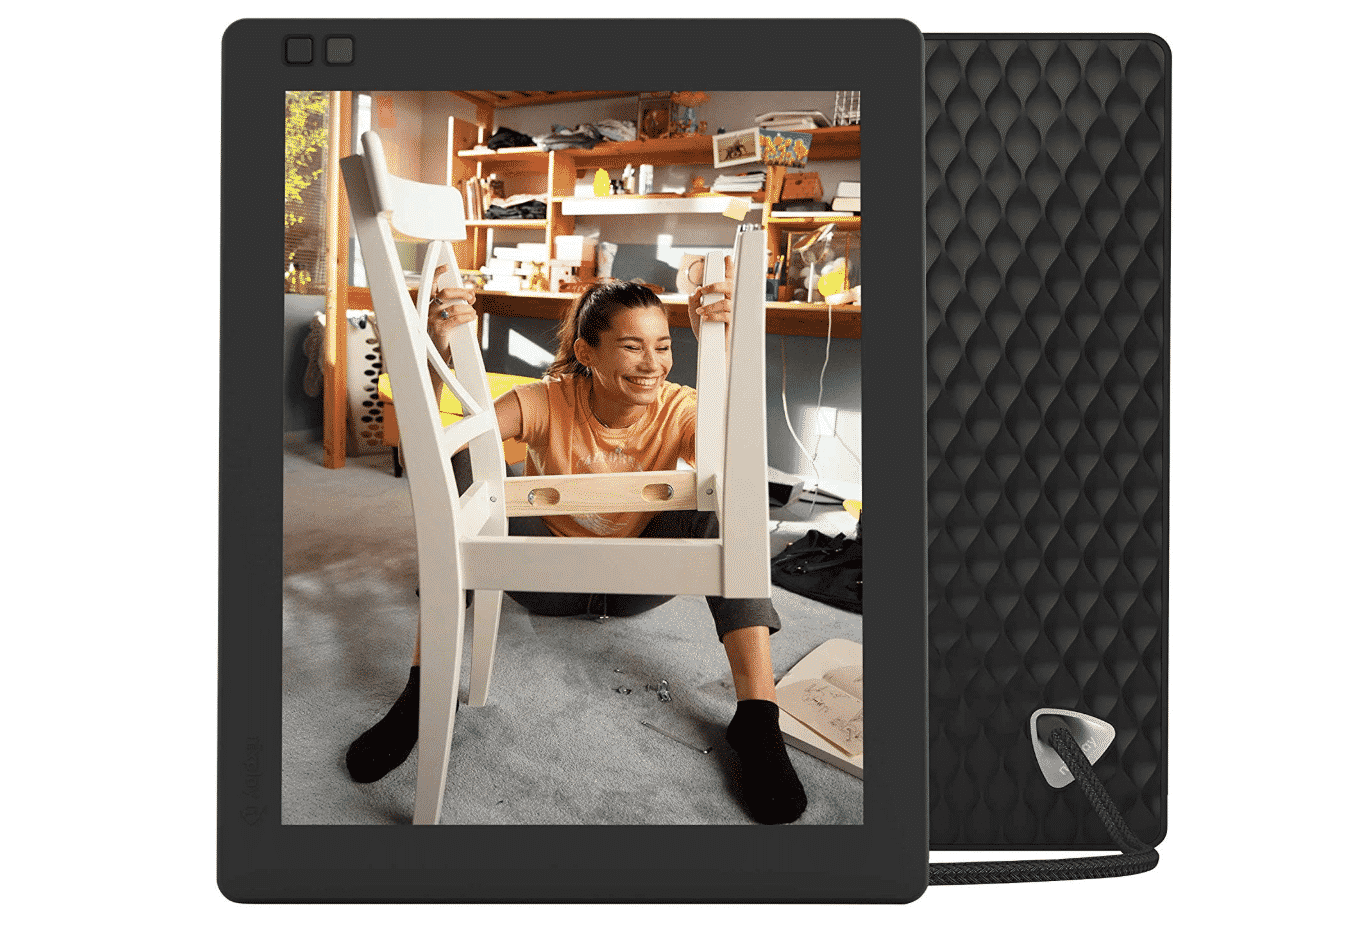 Take $63 Off When You Buy the 10-inch 2K Digital Photo Frame from NixPlay